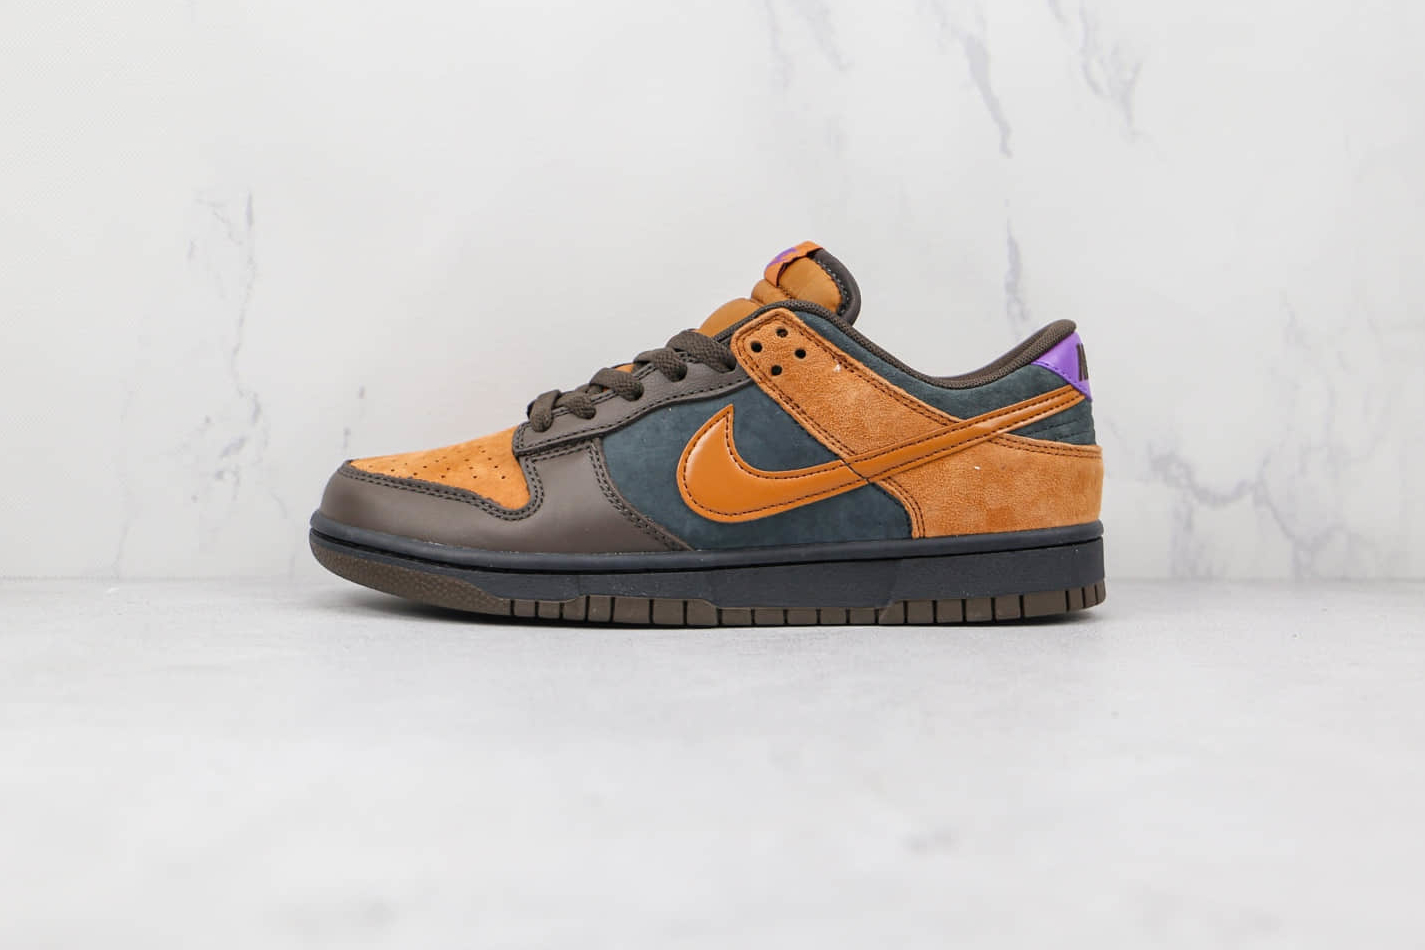 Nike Dunk Low Premium 'Cider' DH0601-001 - Stylish and Exclusive.